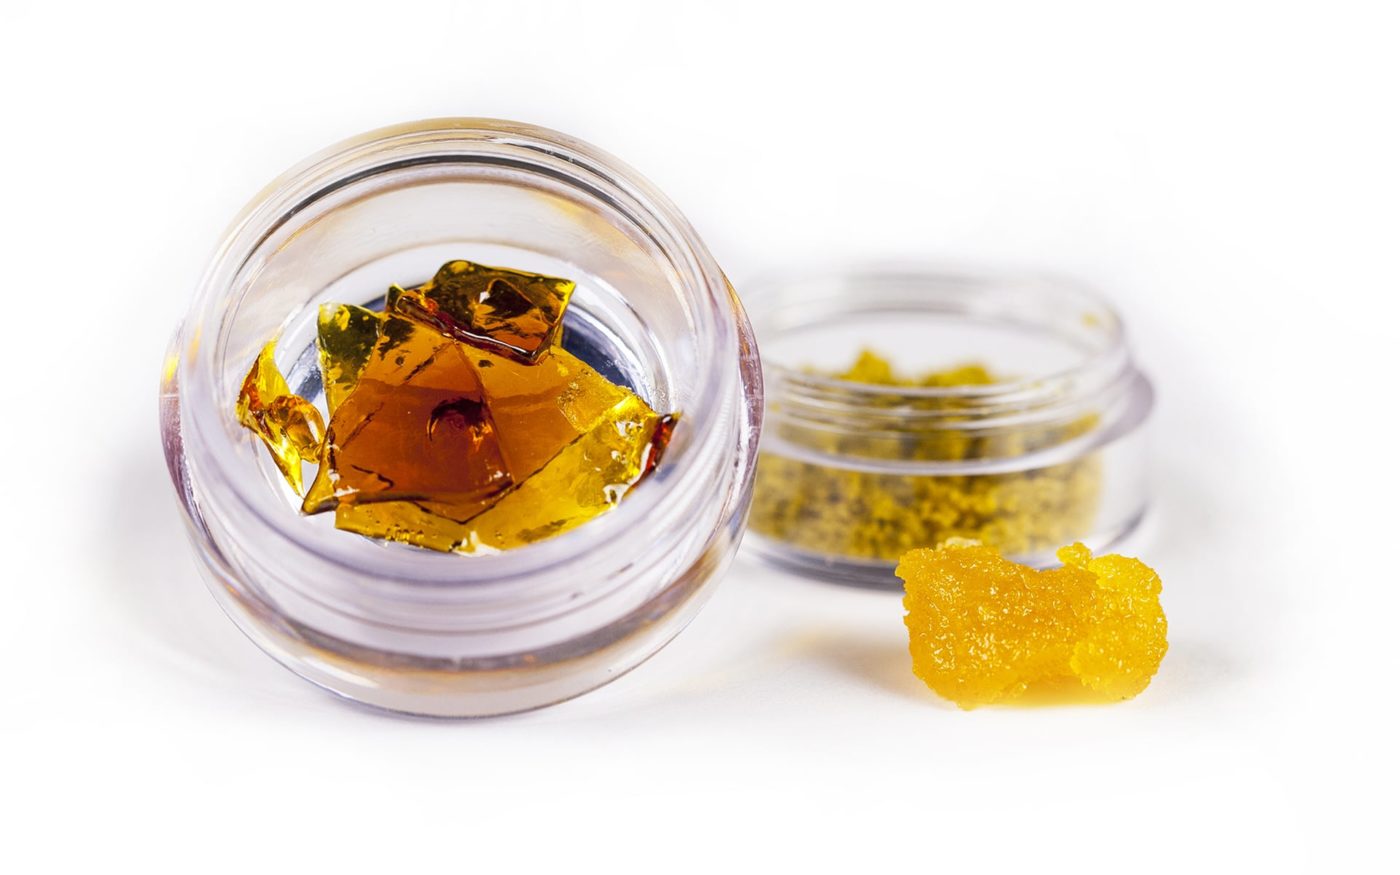 HOW IS CBD SHATTER MADE?